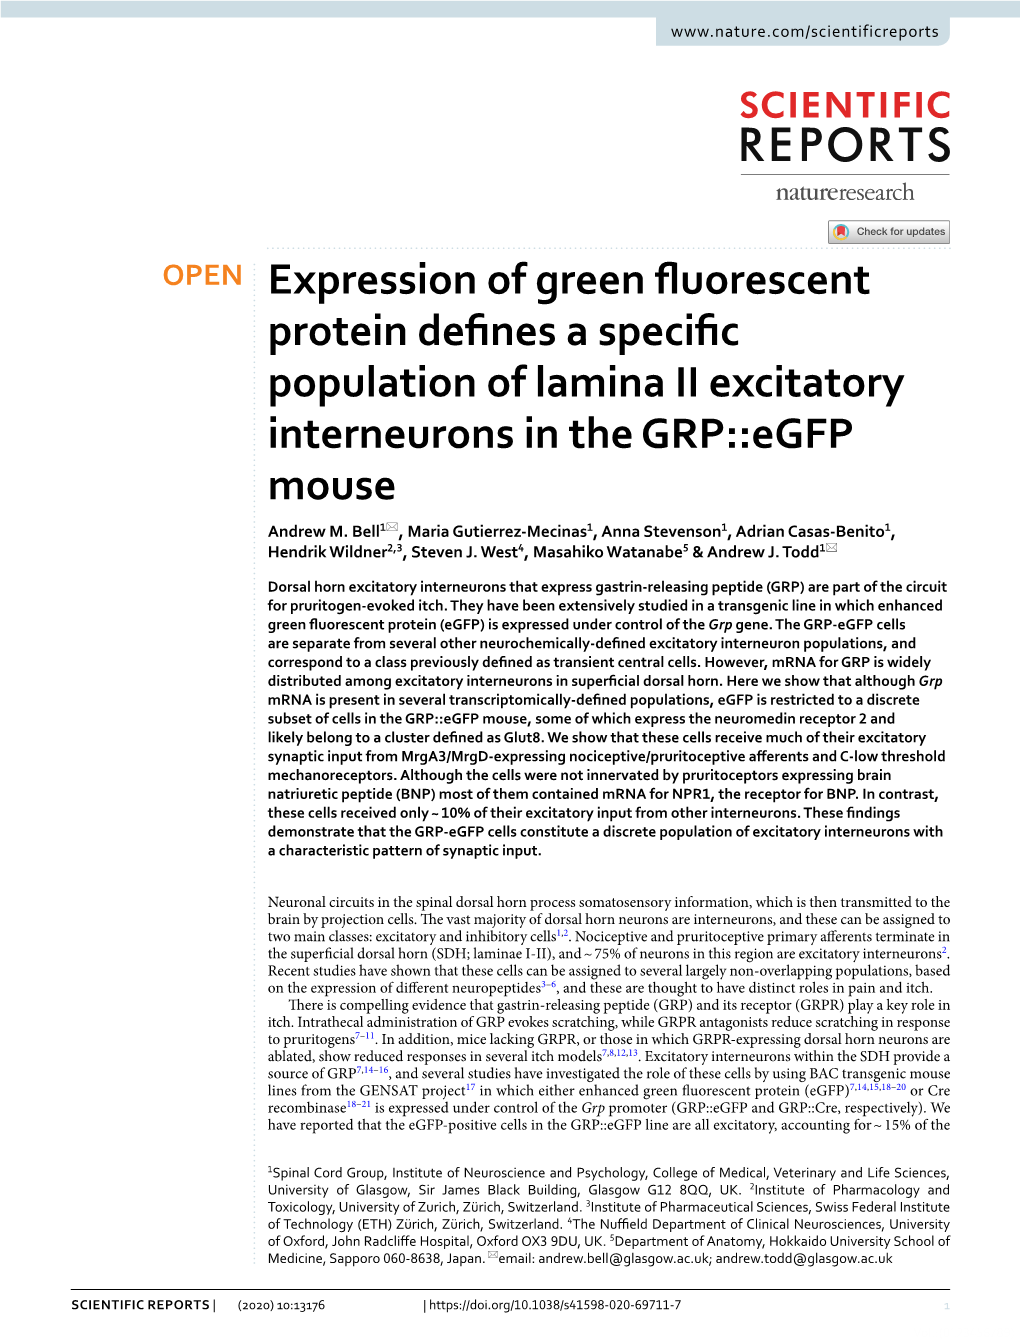 Expression of Green Fluorescent Protein Defines a Specific